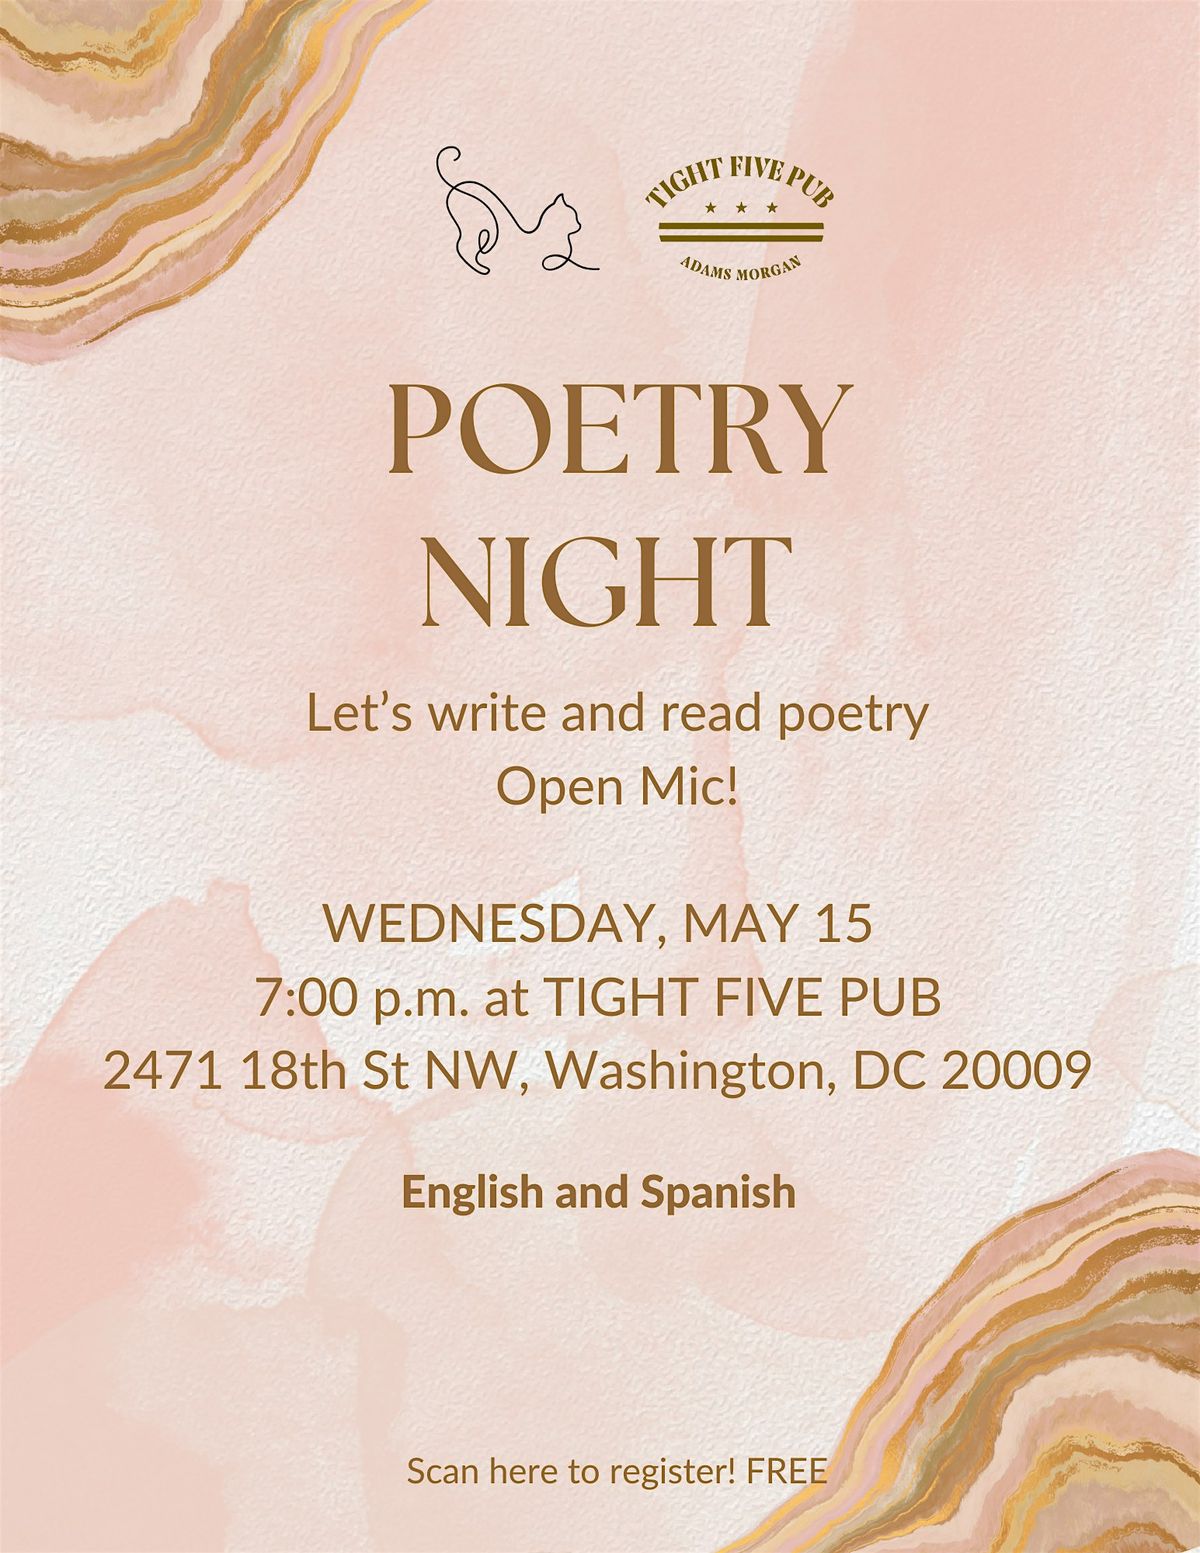 Poetry night - Writing and Open Mic